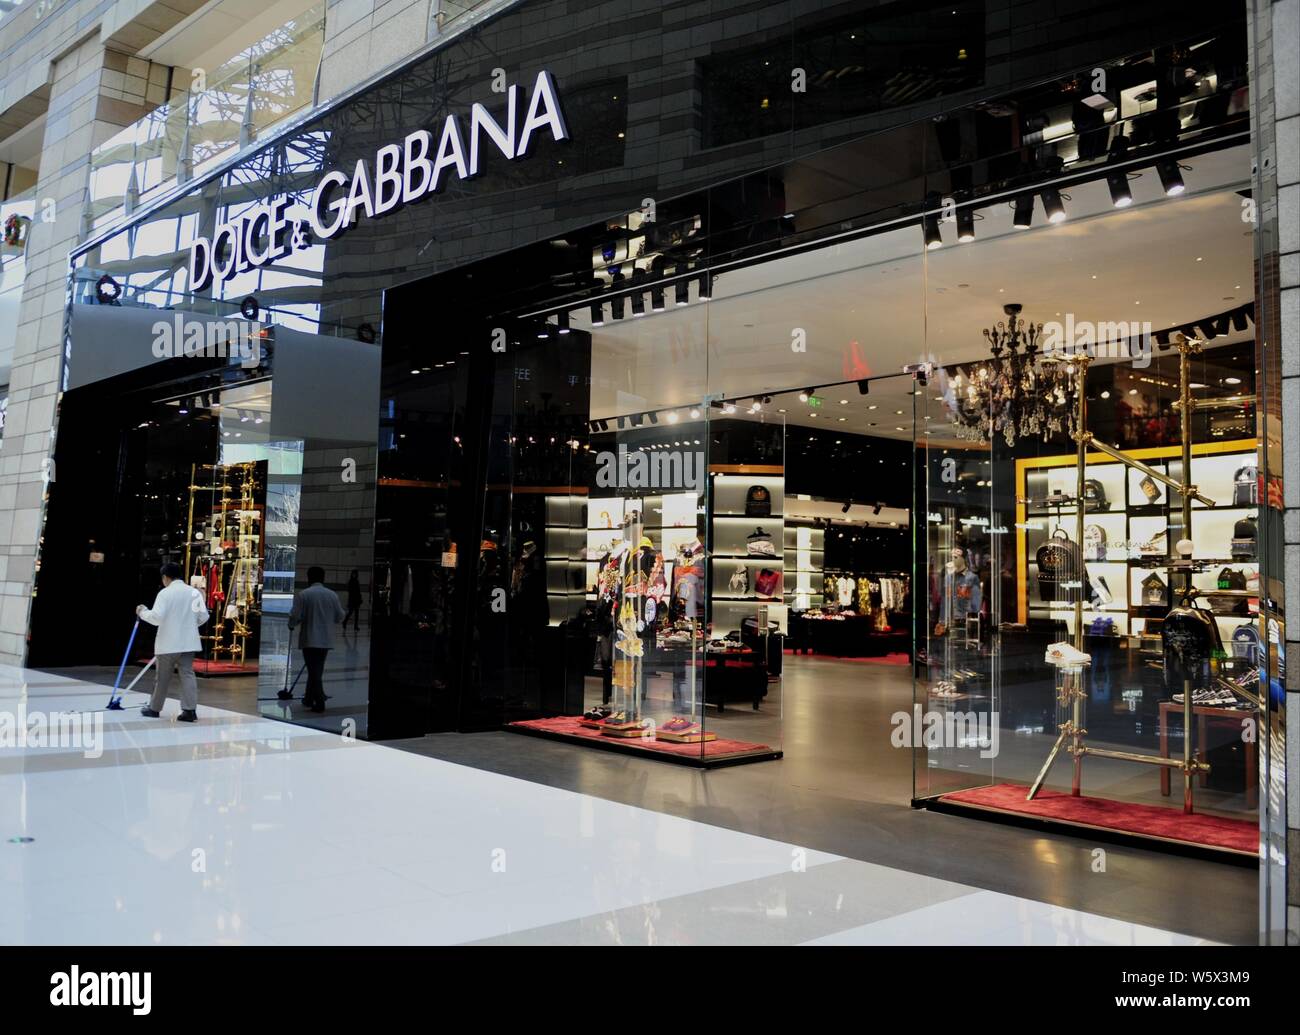 dolce and gabbana outlet near me